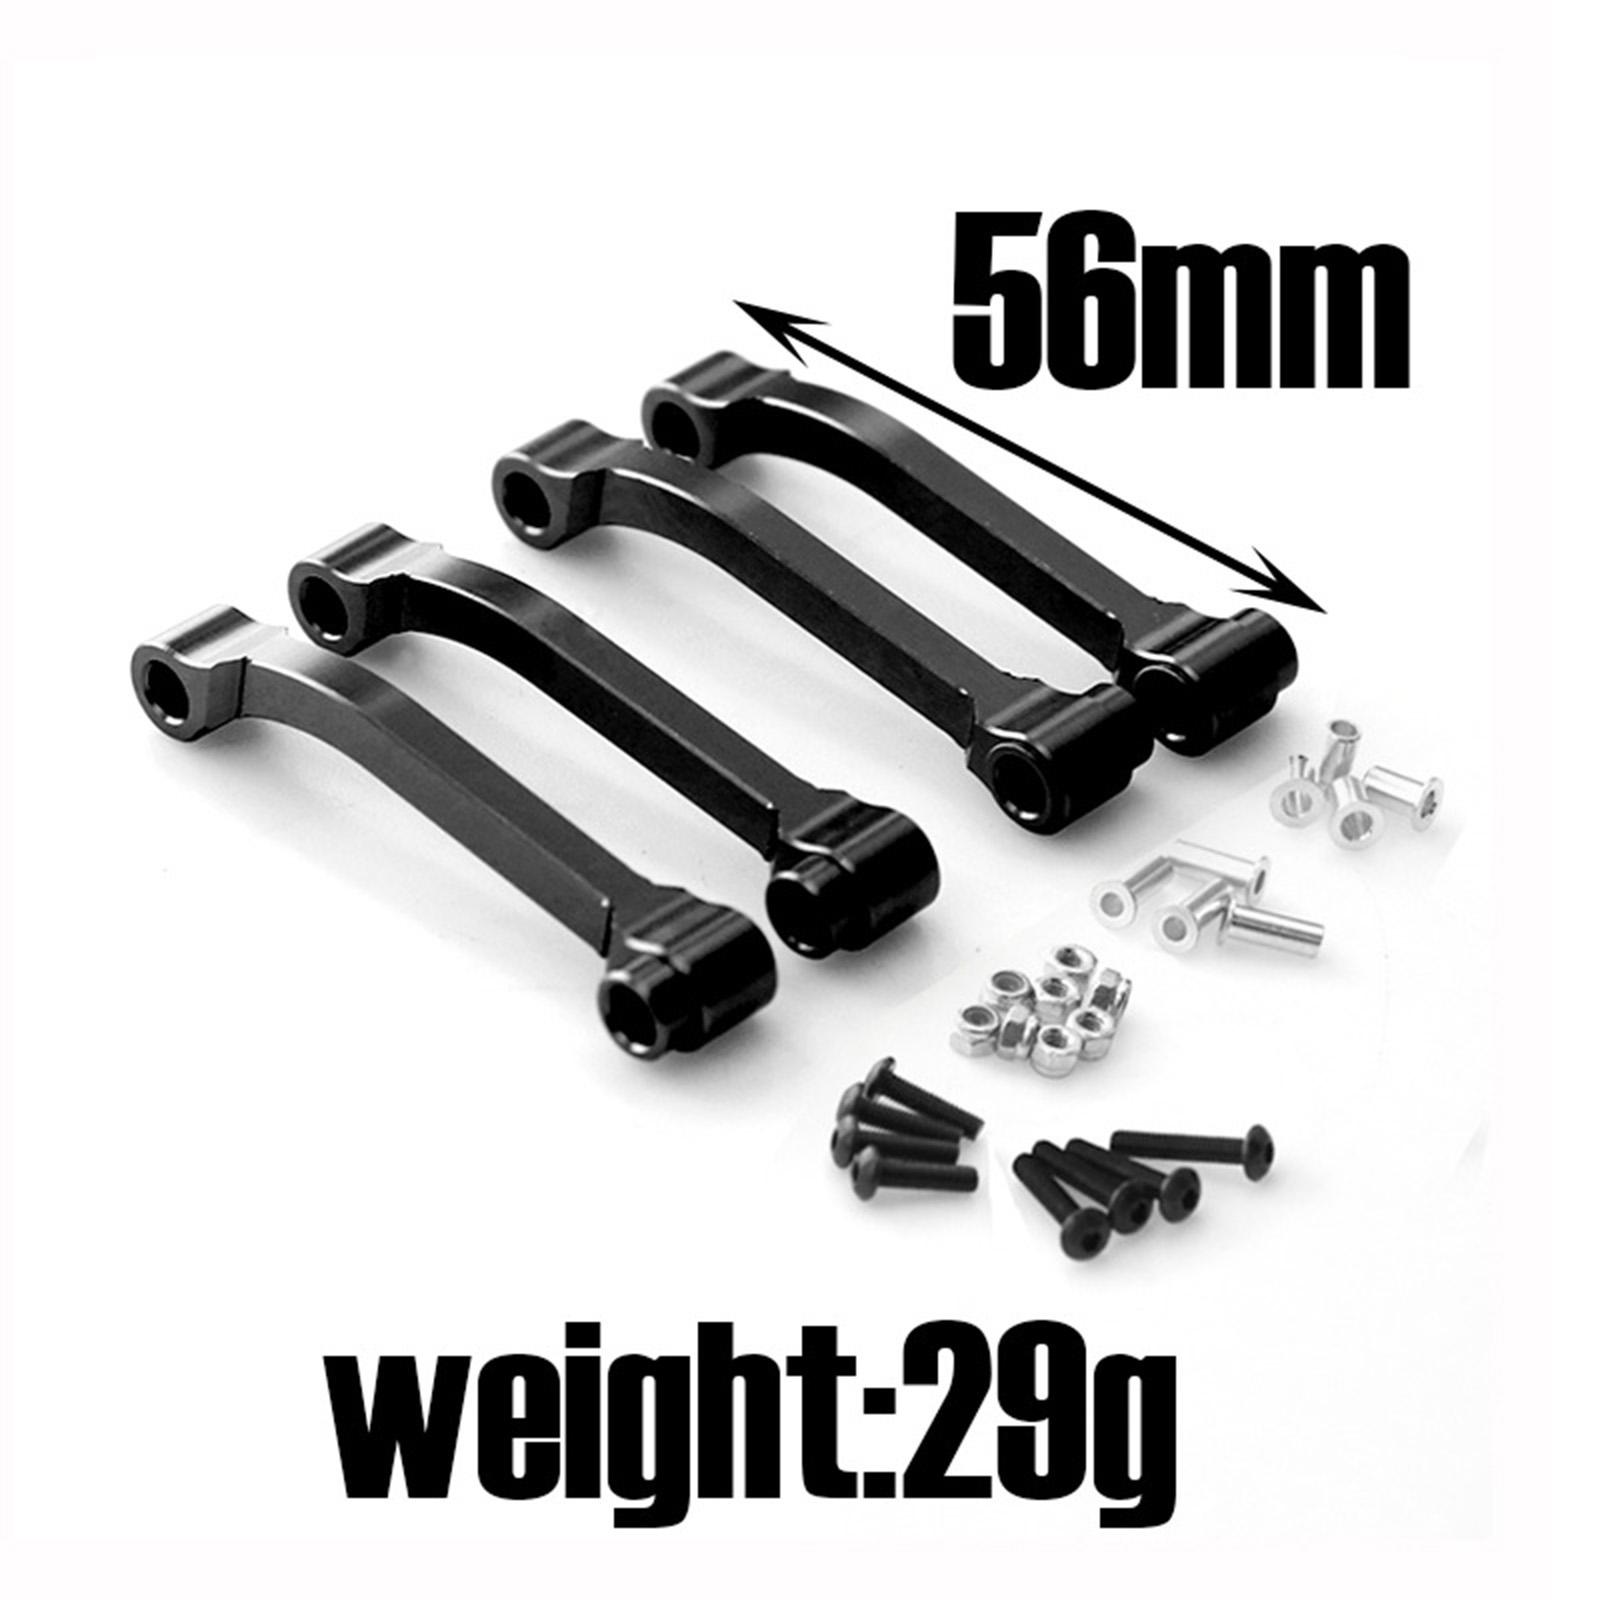 4x Aluminum Alloy 56mm Arm /14 Tractor Truck Series 56301 56302 56303 56304 56306 56309 56310 56314 56316 56319 56322 56325 - Black - image 4 of 4